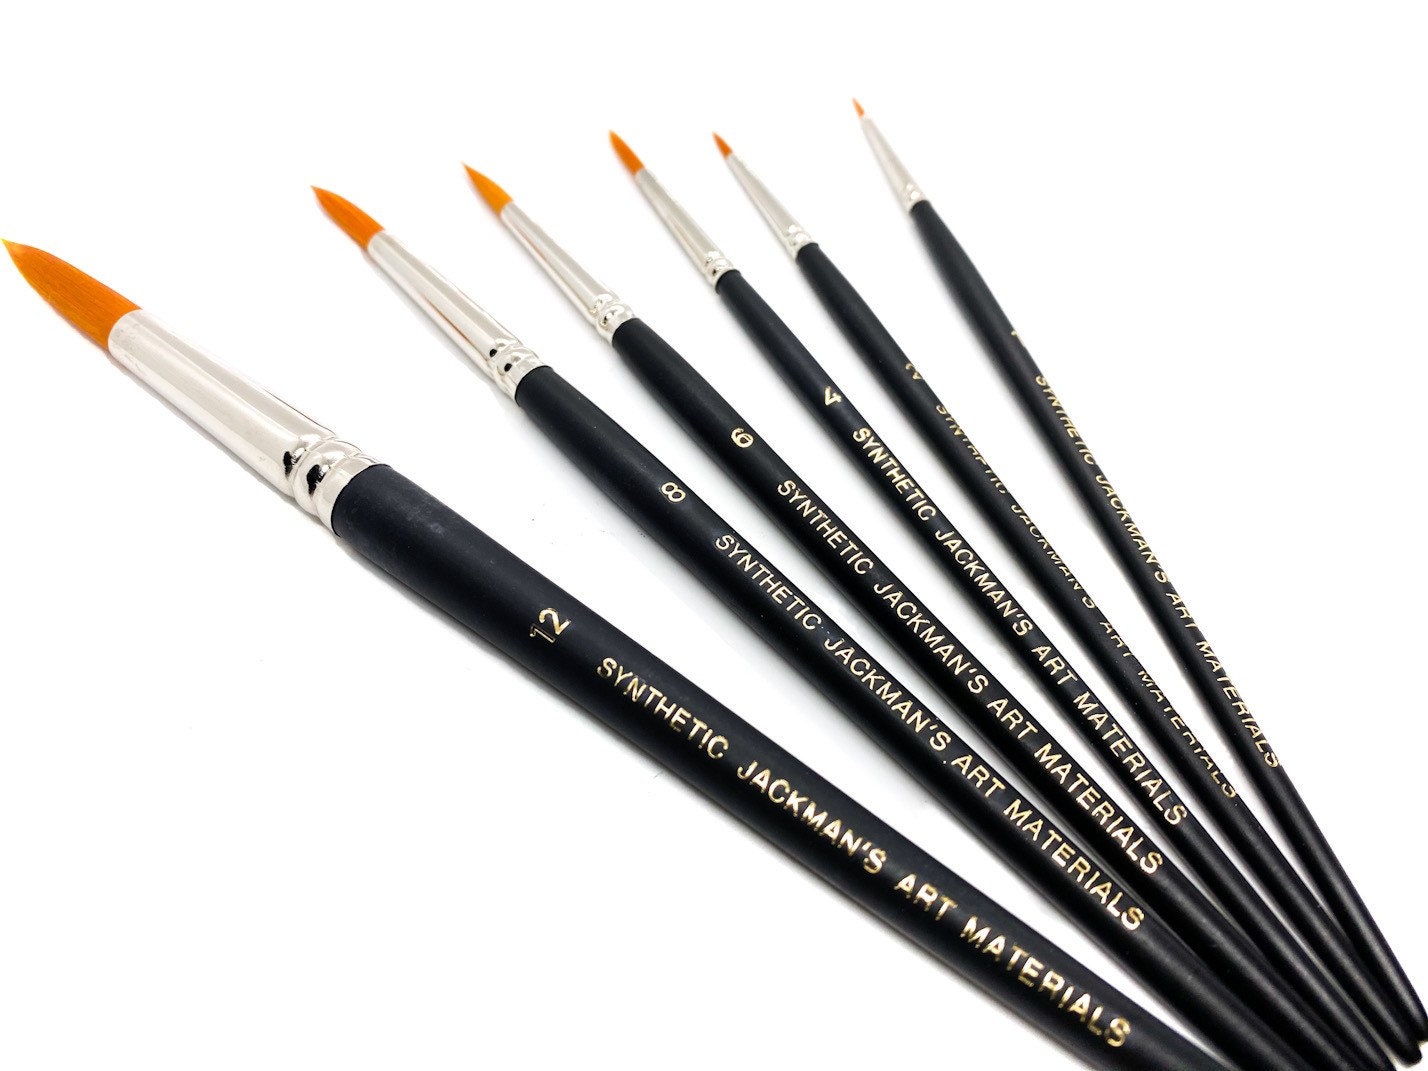 Arta : Set of 10 Synthetic Brush : Brushes with White Synthetic Hair for  Watercolour, Acrylic paint and Inks for Students & Artists